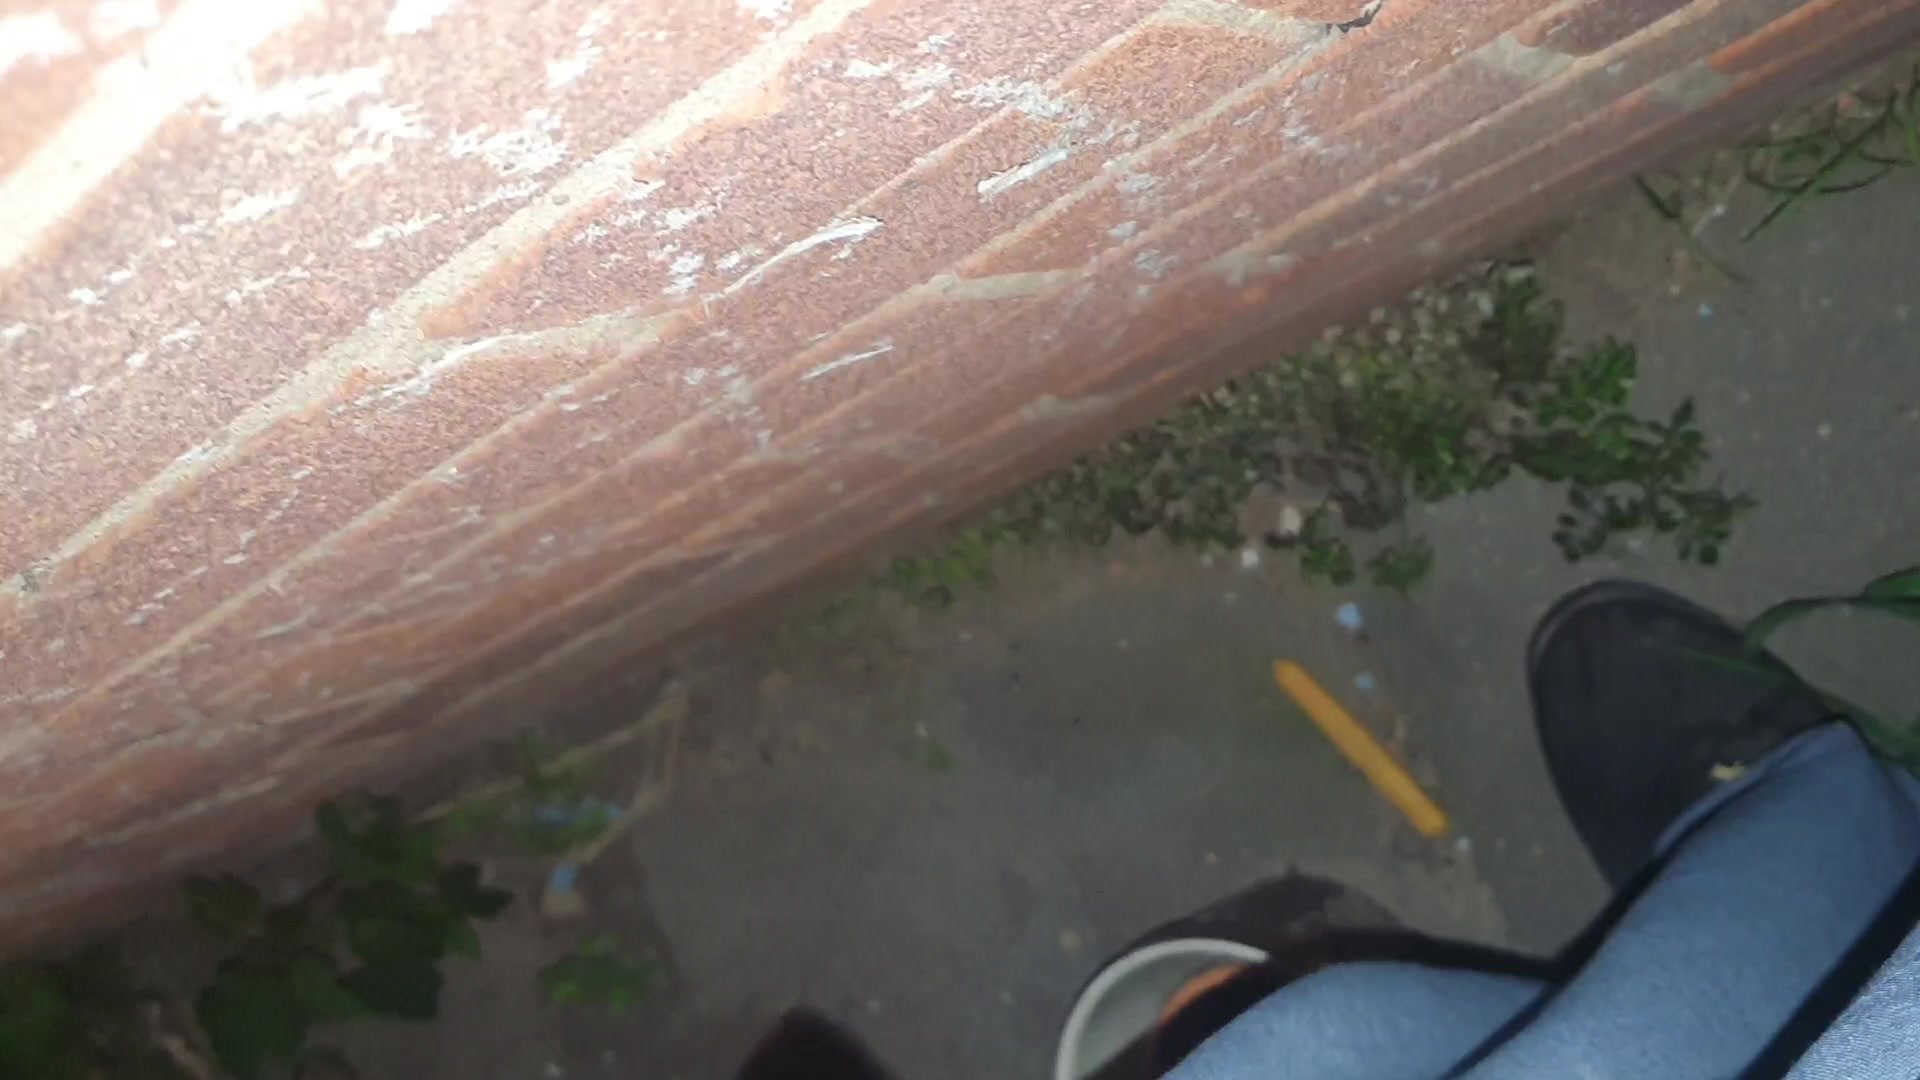 Pissing up the wall - video 2